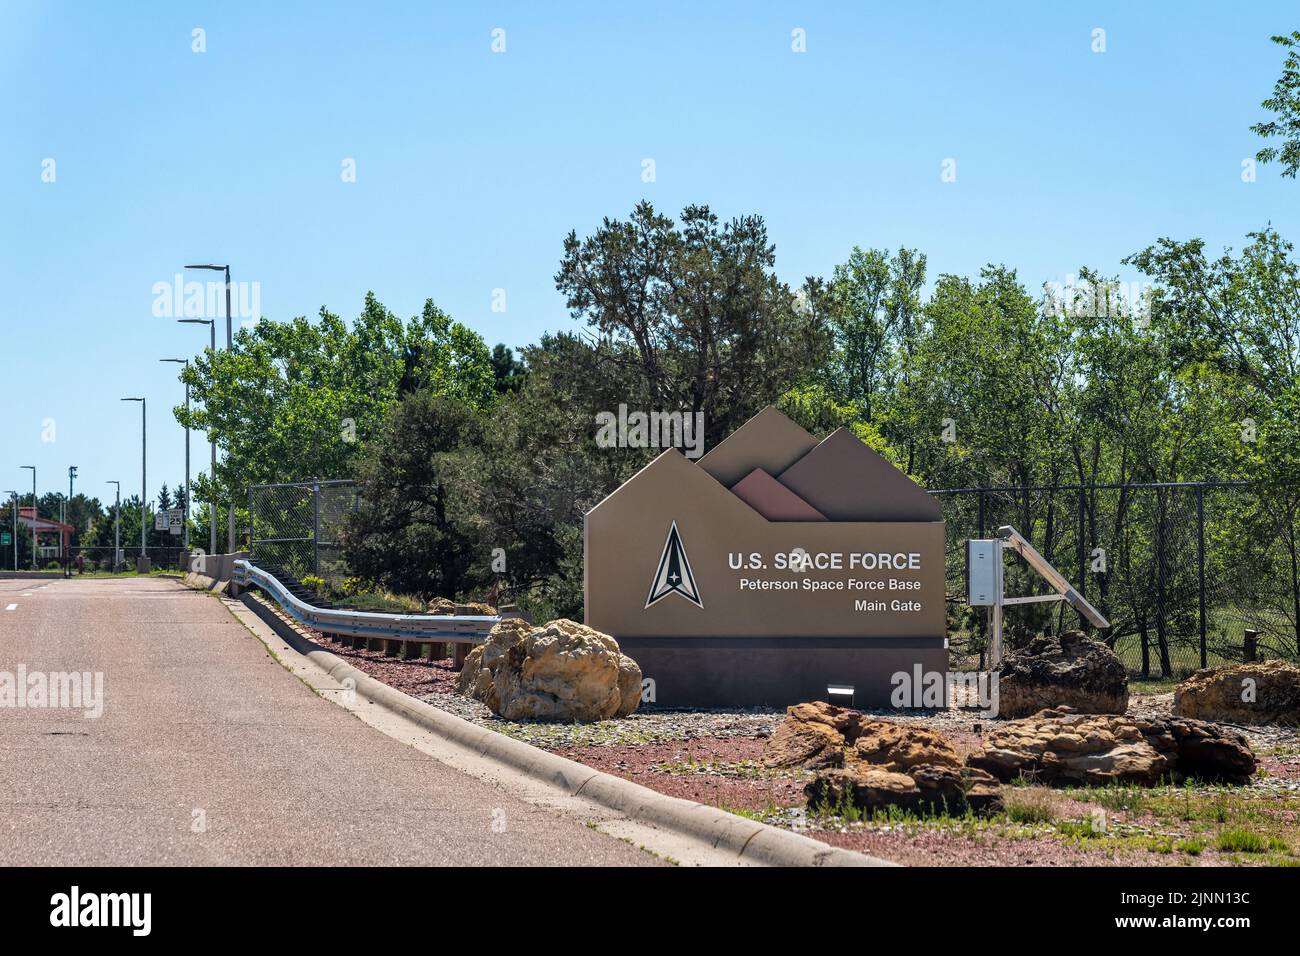 Colorado Springs, CO - July 8, 2022:U.S. Space Force Peterson Space Force Base Main Gate sign Stock Photo